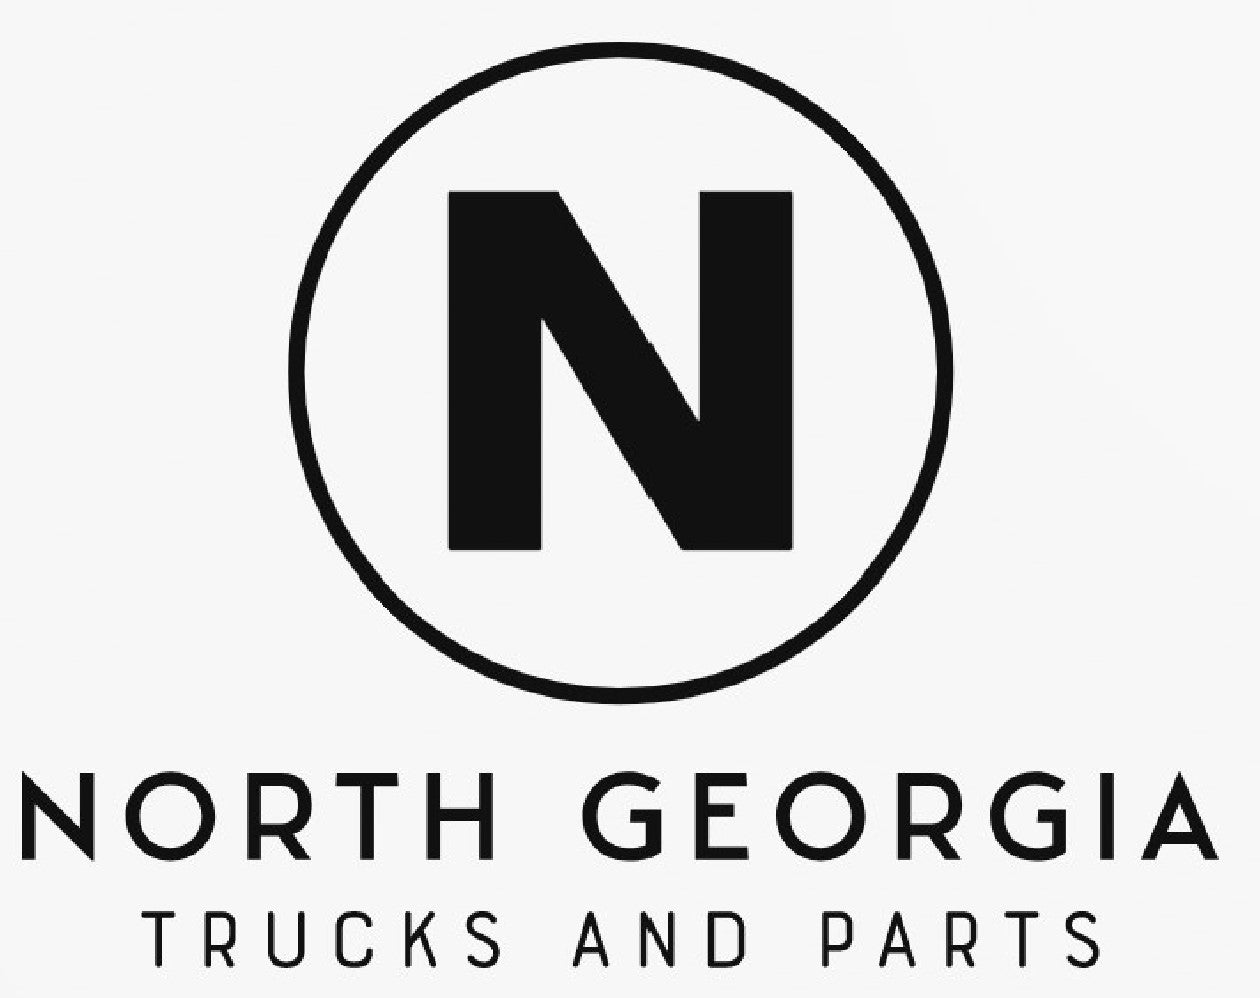 Used Truck Parts - North Georgia Trucks and Parts